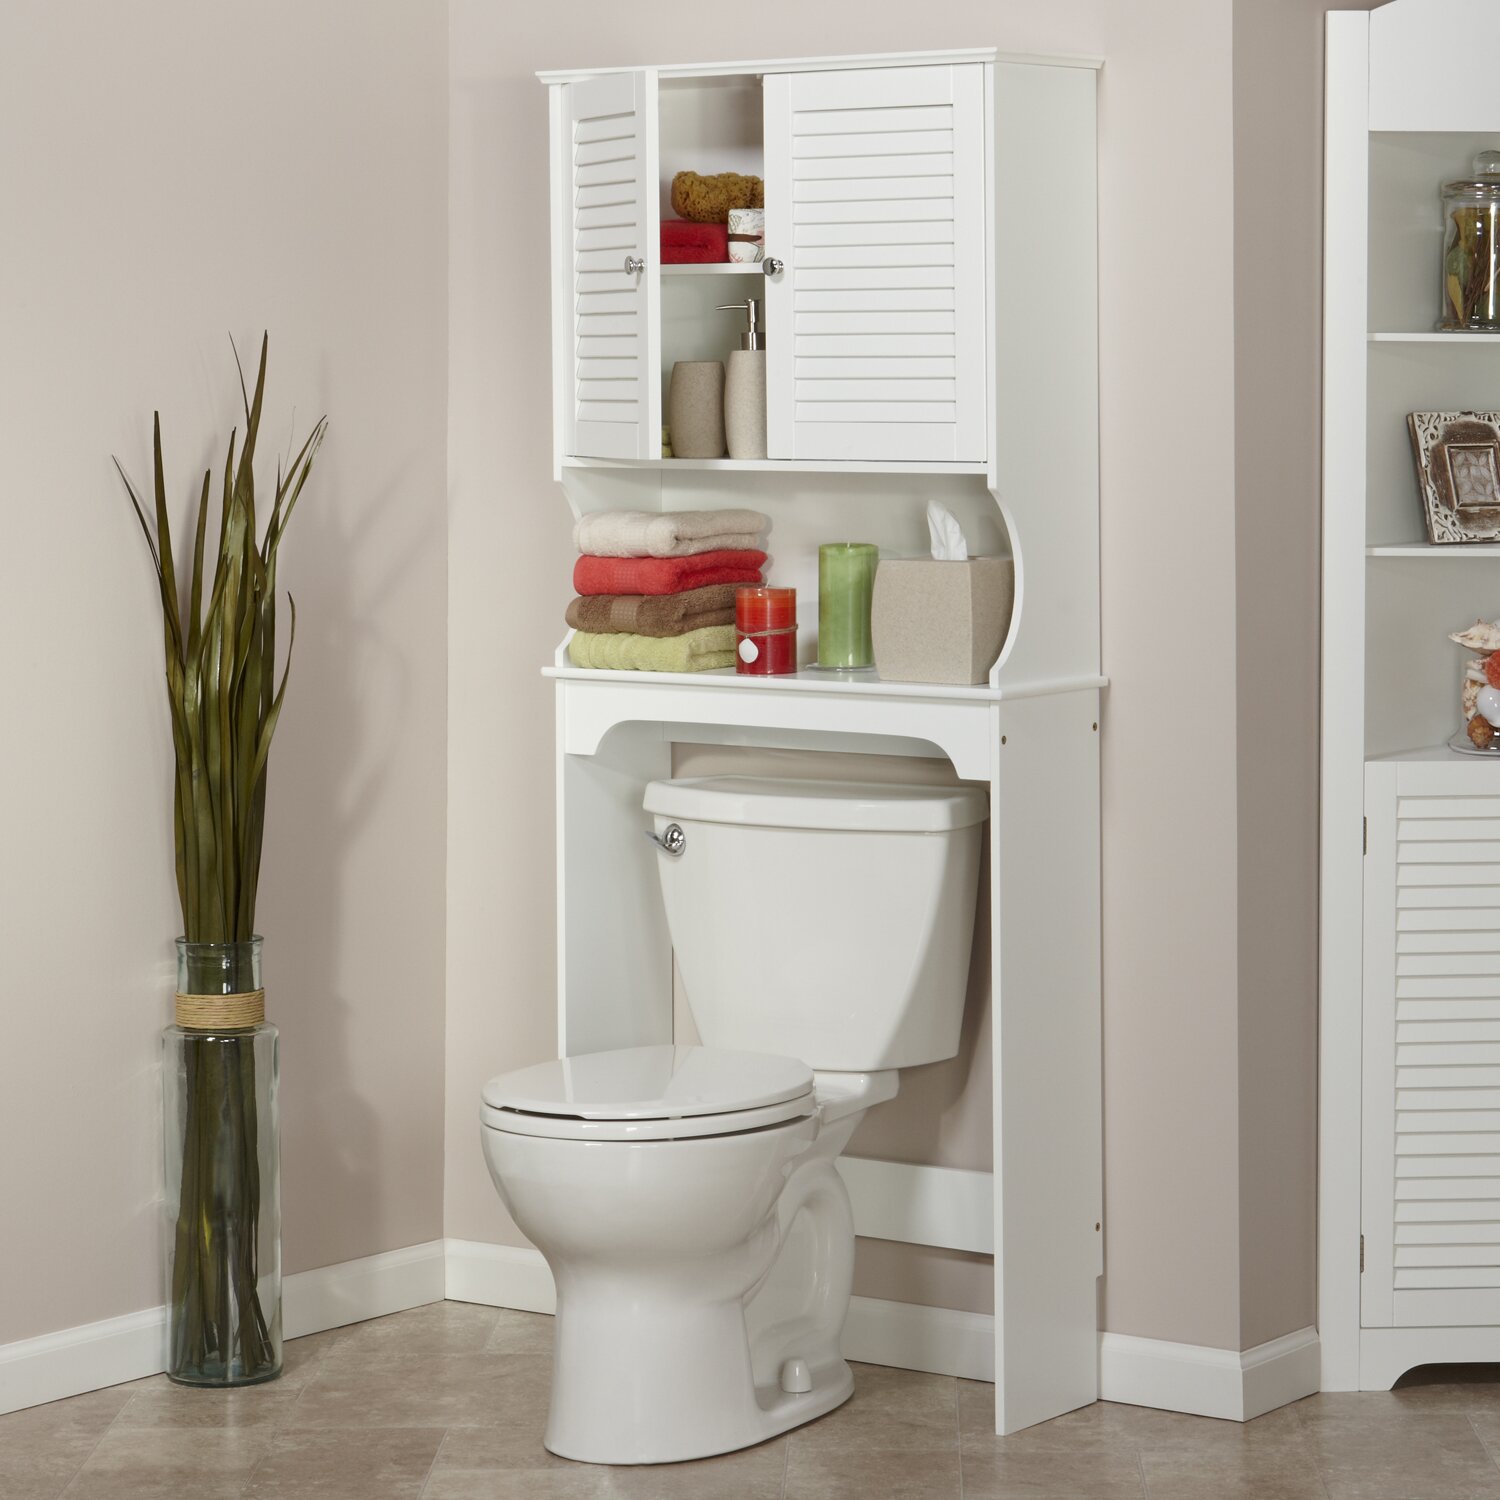 Darby Home Co Herrick 27.36" x 63.75" Free Standing Over the Toilet & Reviews Wayfair